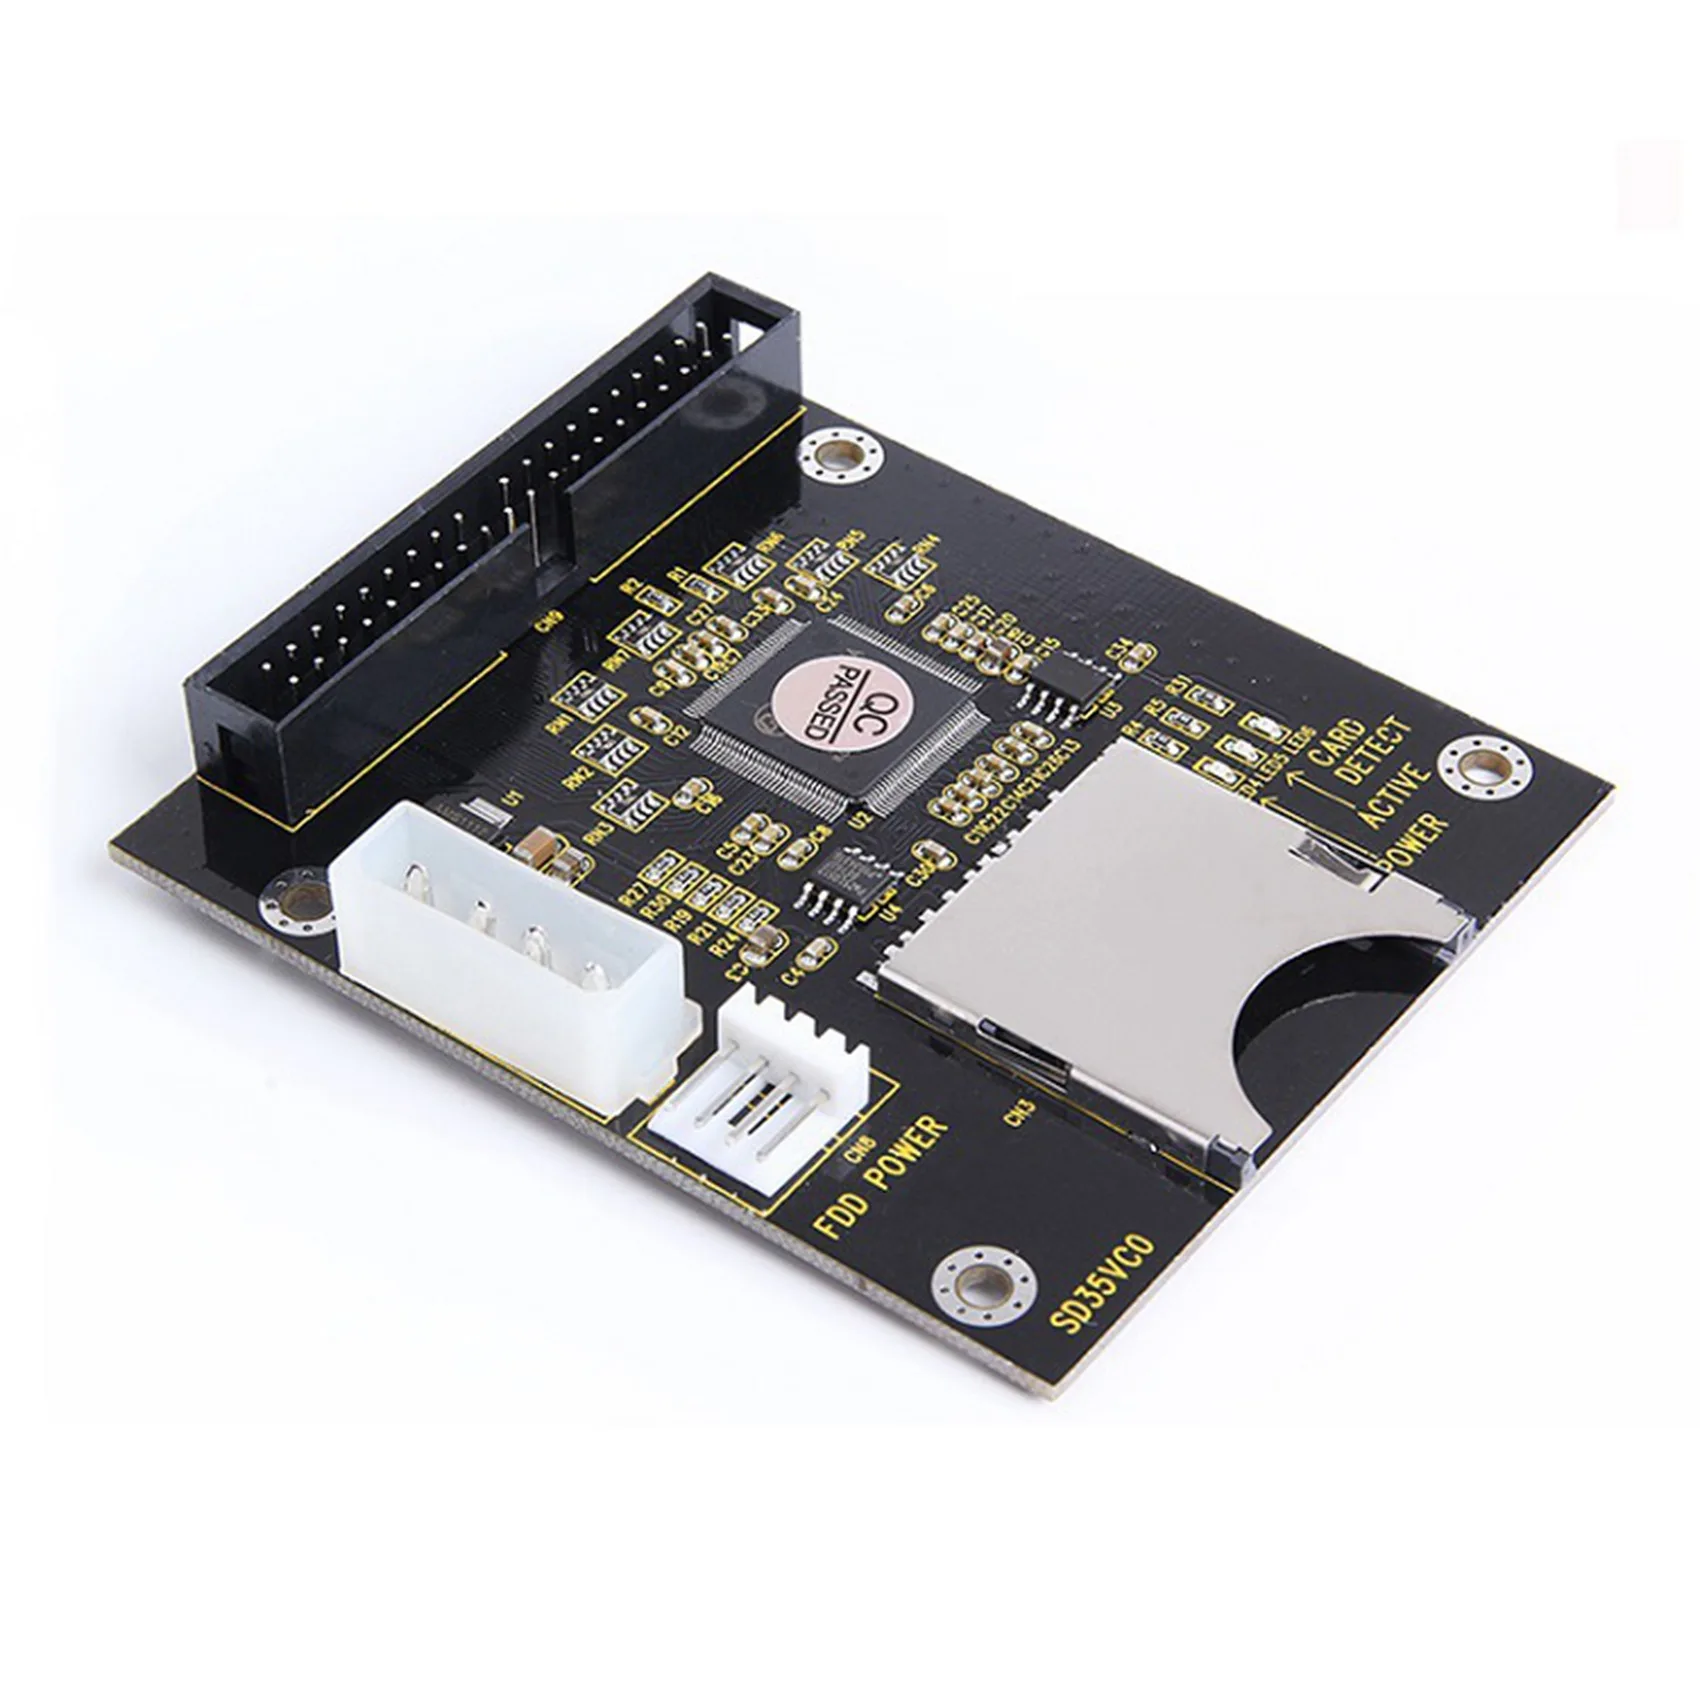 Карта конвертера SD на 3,5 дюйма IDE 40 Pin IDE SD Card Adapter SSD Embedded Storage Adapter Card IDE Expansion Card 2